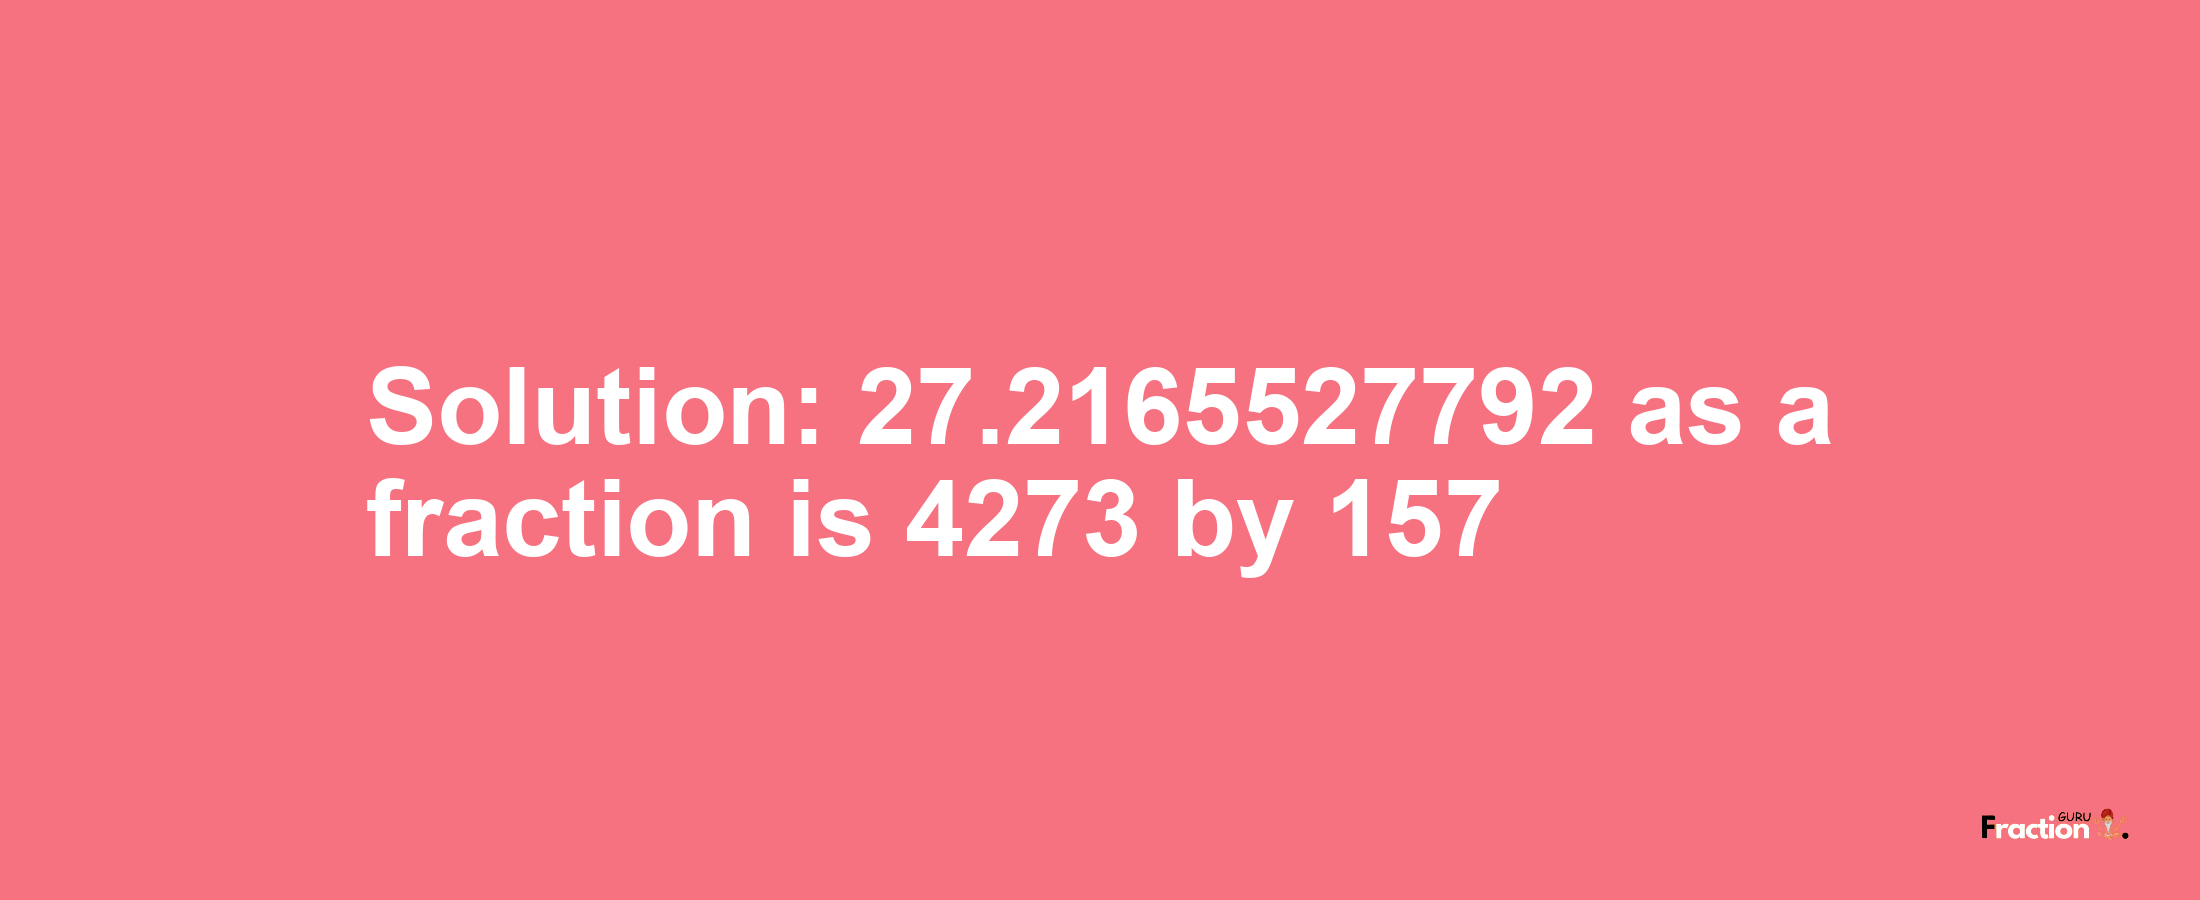 Solution:27.2165527792 as a fraction is 4273/157